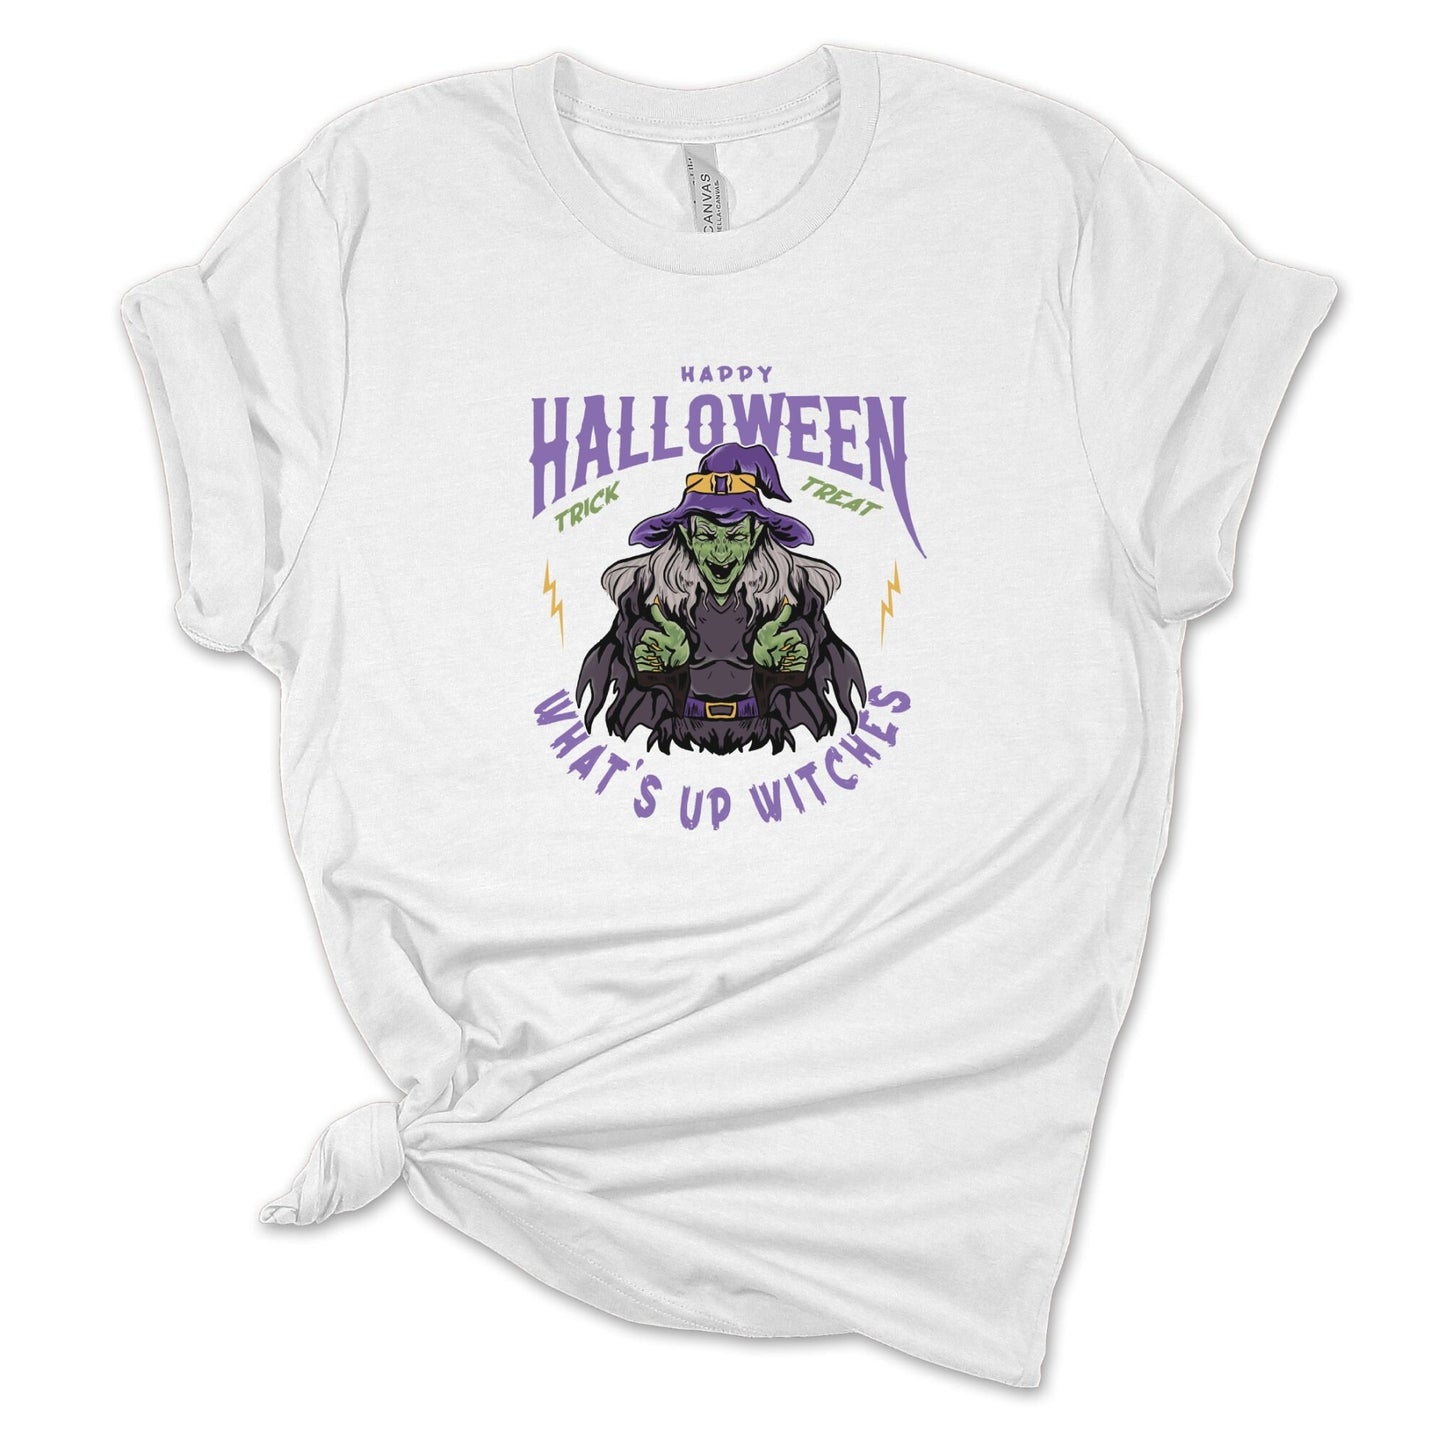 Happy Halloween What's Up Witches, Funny Halloween Shirt, Halloween Shirts, Funny Shirts, For Women, Cute Shirts, Teacher Shirt